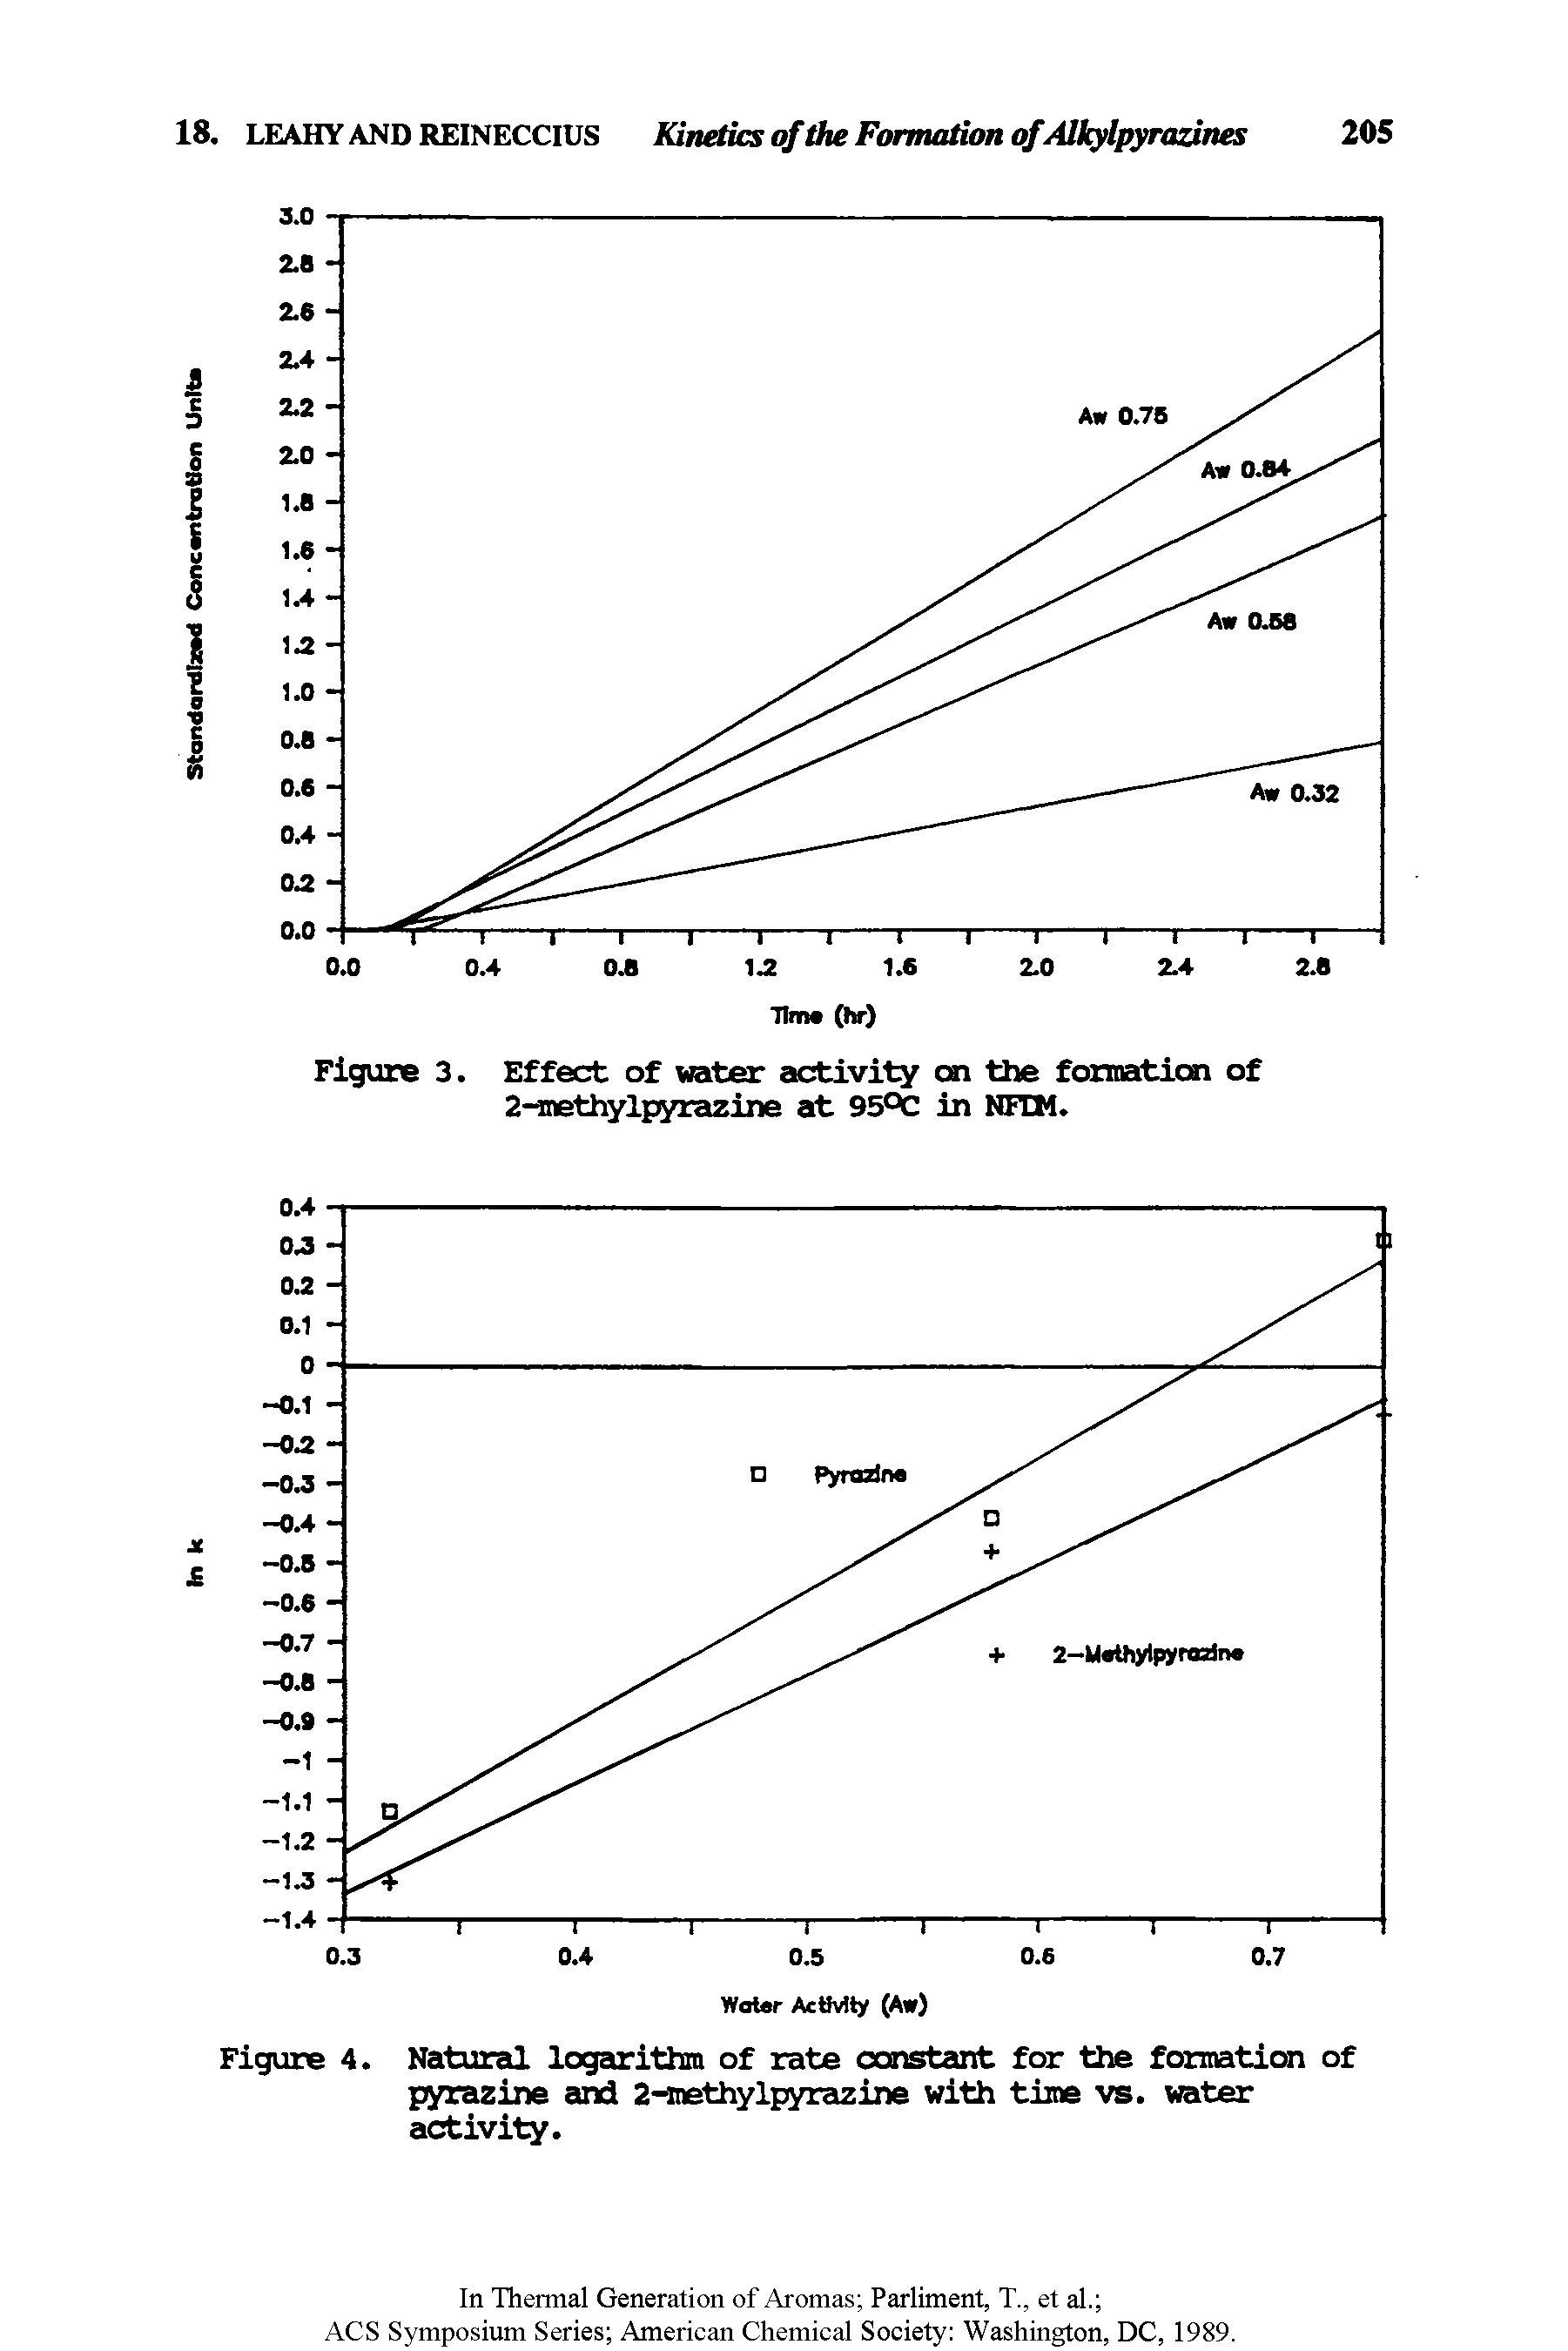 Figure 4 Natural logarithm of rate constant for the formation of pyrazine and 2-methylpyrazine with time vs. water activity.